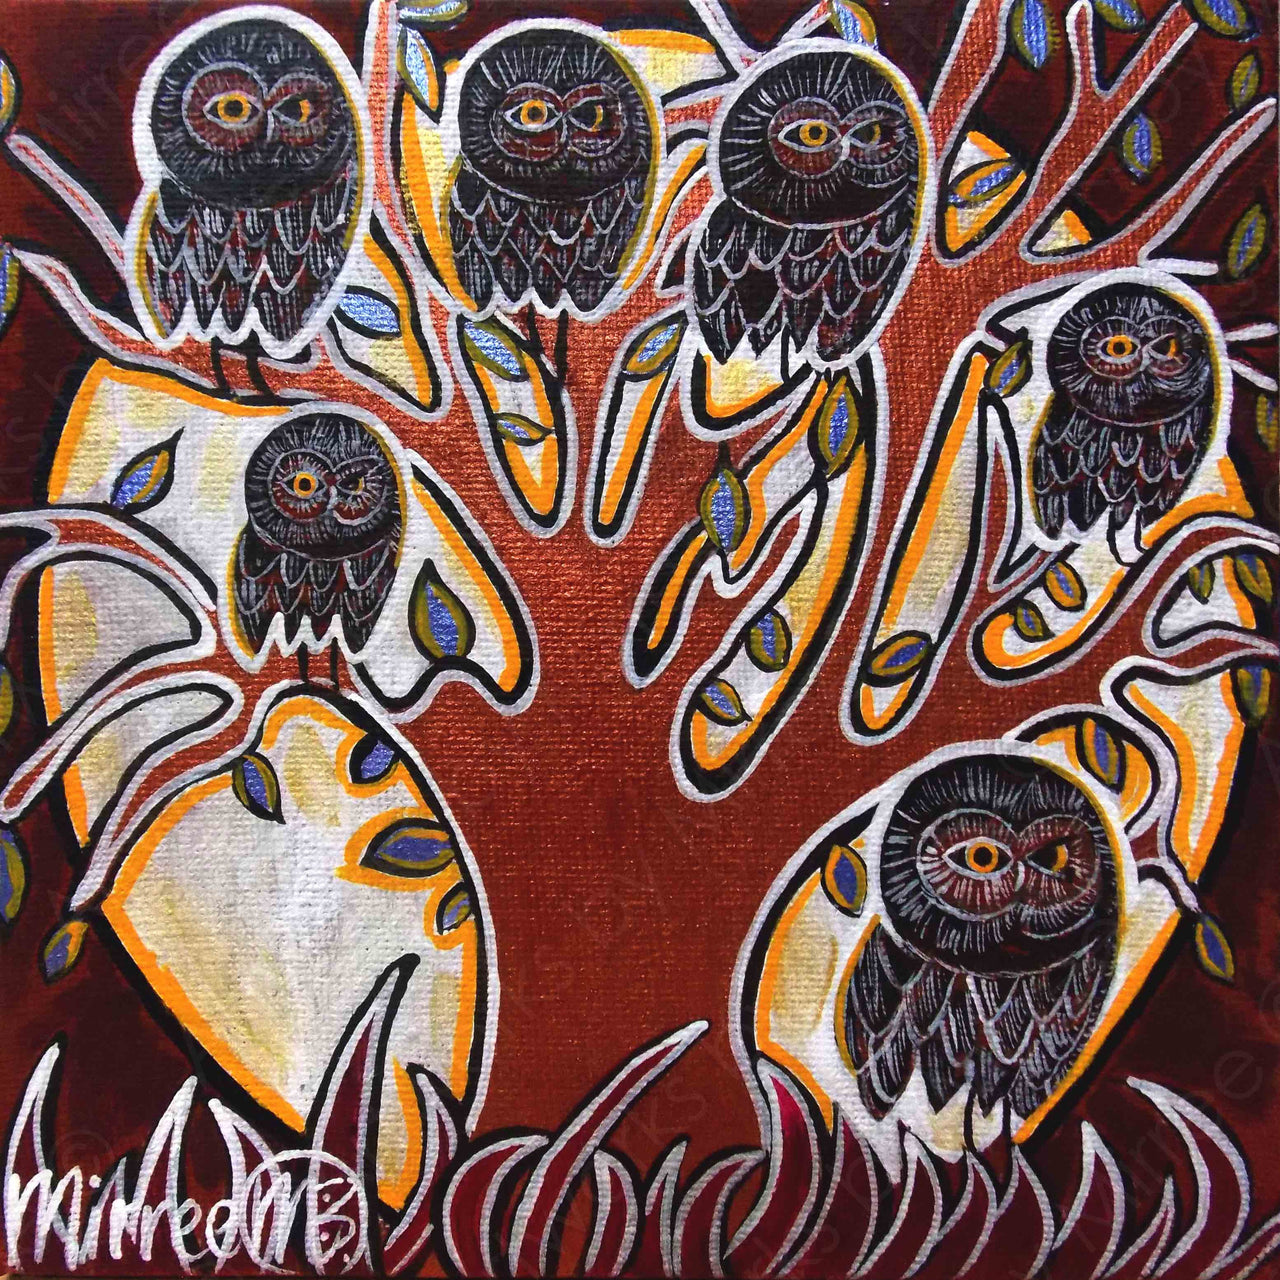 Owls Life Changes Contemporary Aboriginal Art Original Painting by Mirree